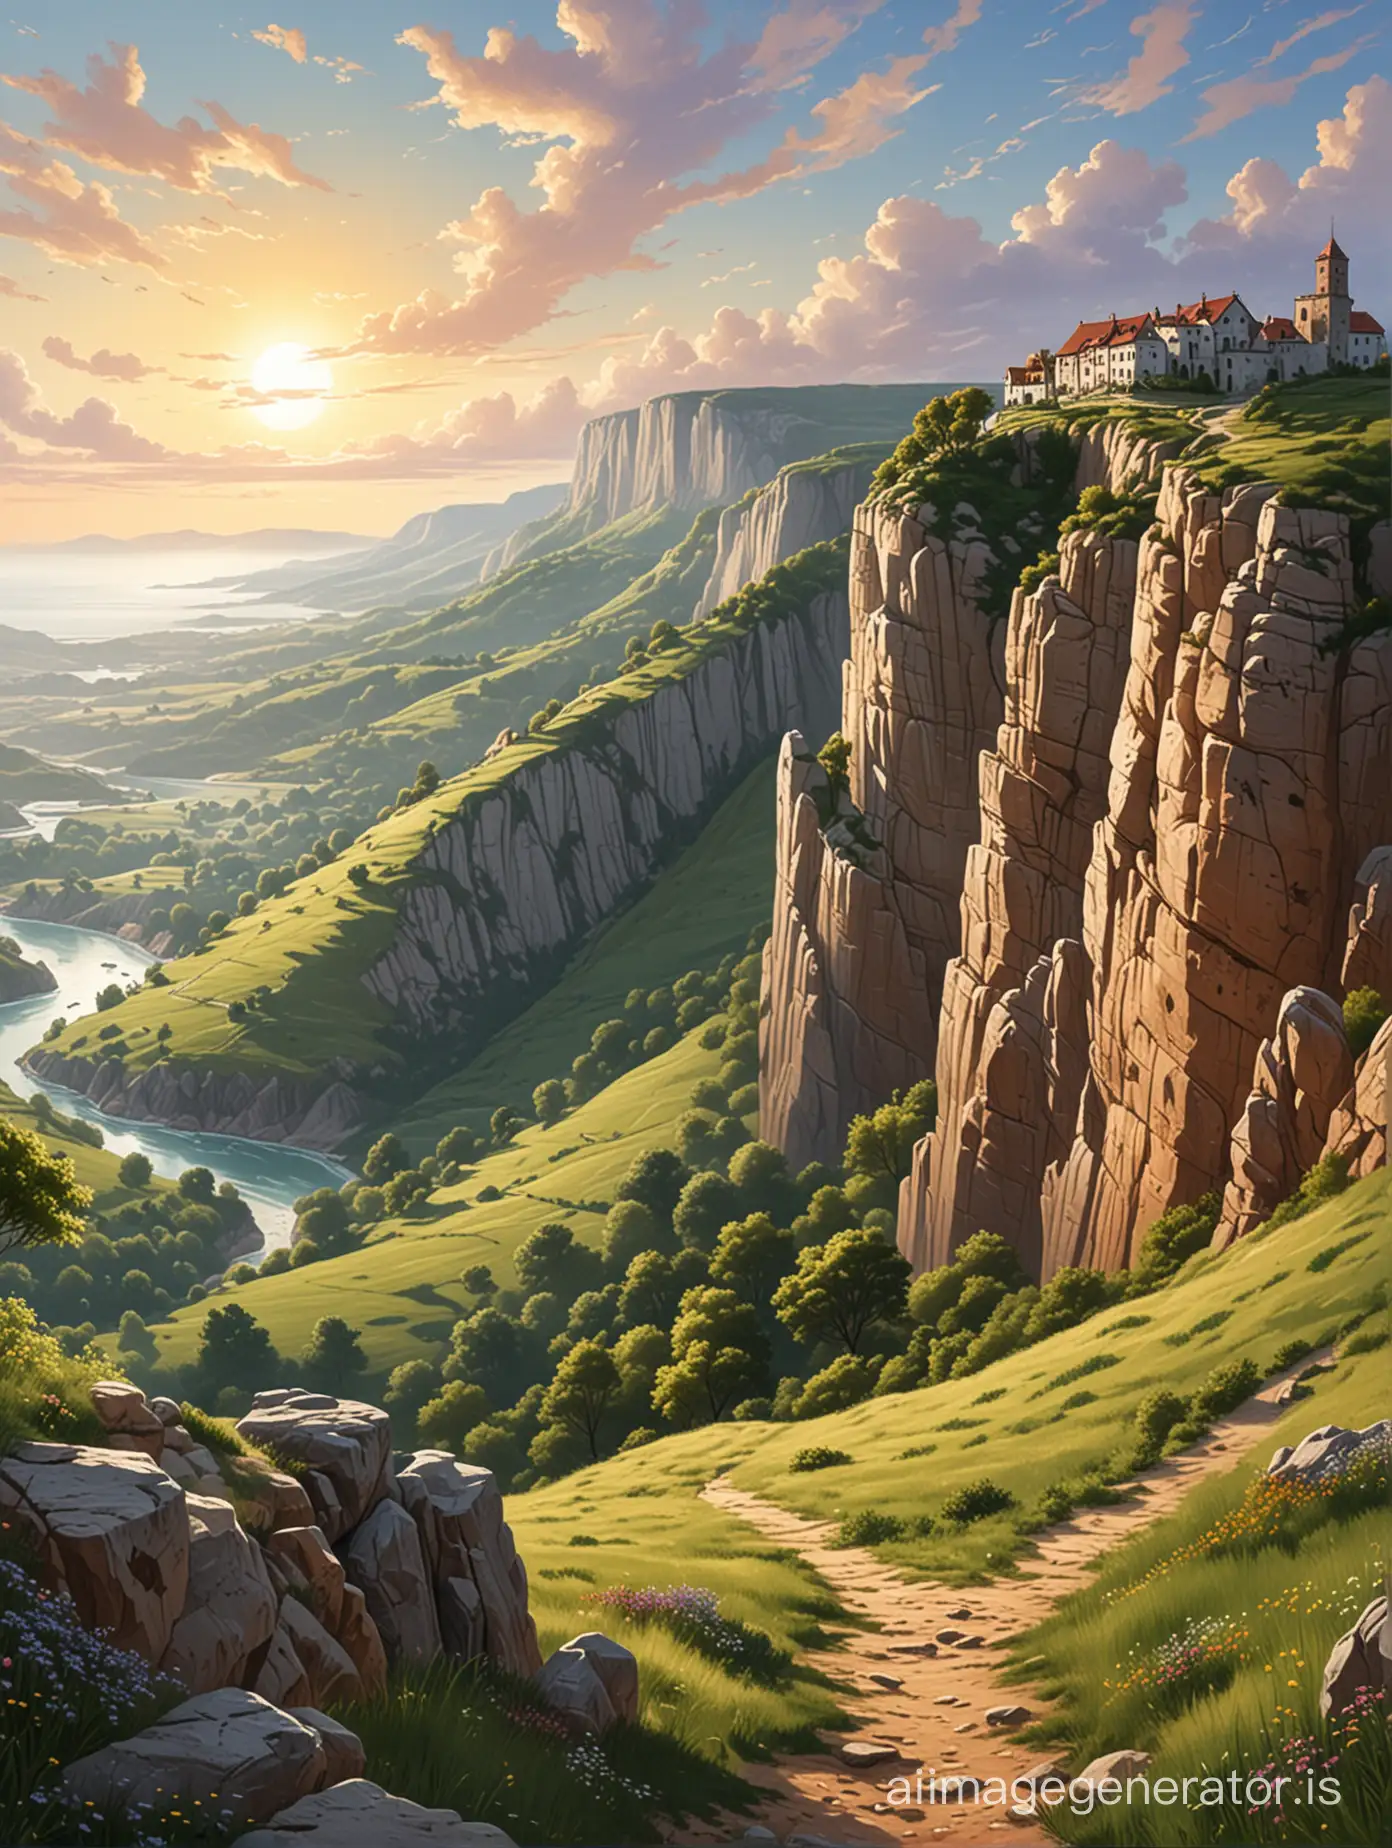 Hilltop-View-Overlooking-a-Cliff-for-Book-Cover-Illustration